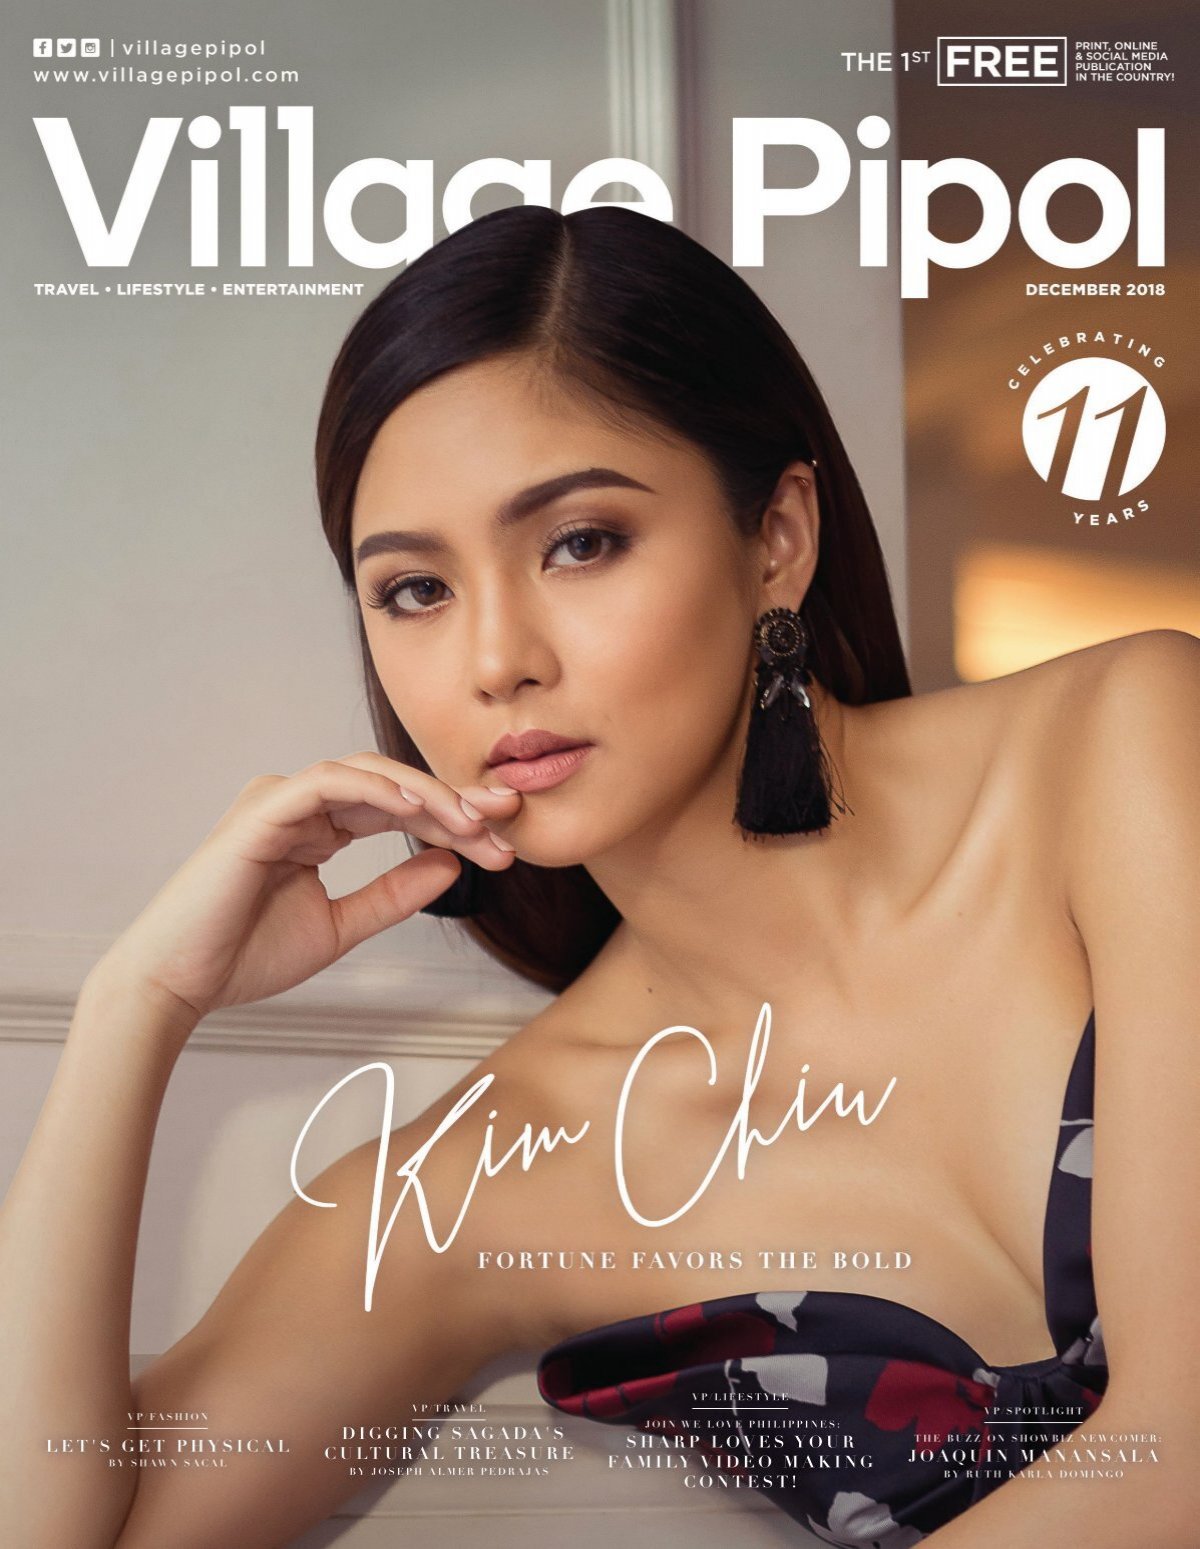 KIM CHIU'S collection of - The Expensive Taste Philippines